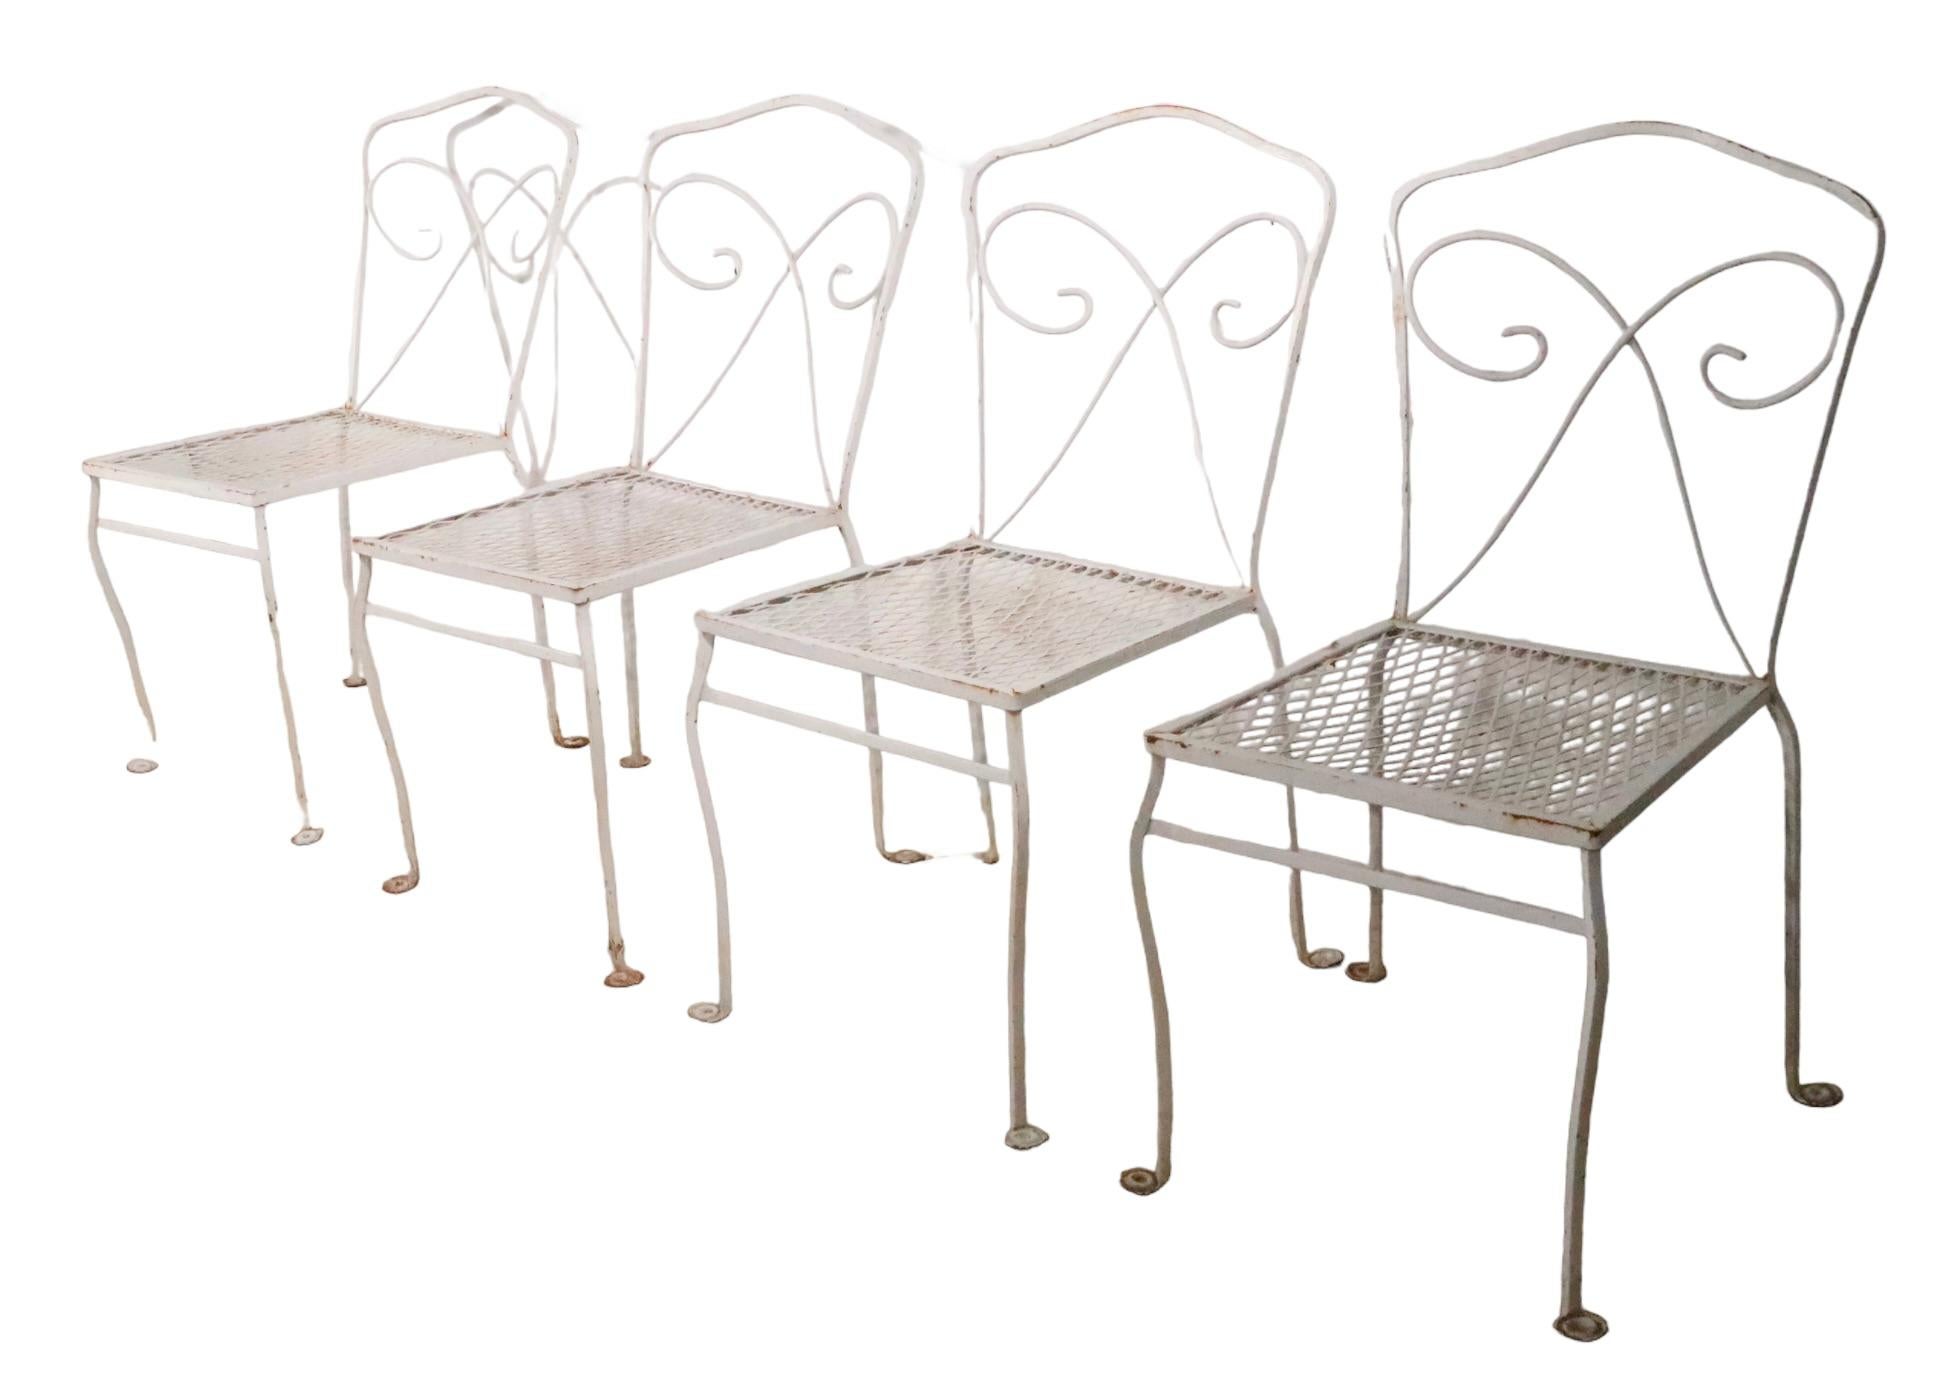 Set of Four Wrought Iron Garden Patio Chairs Possibly by Woodard c 1950/1970s  For Sale 3